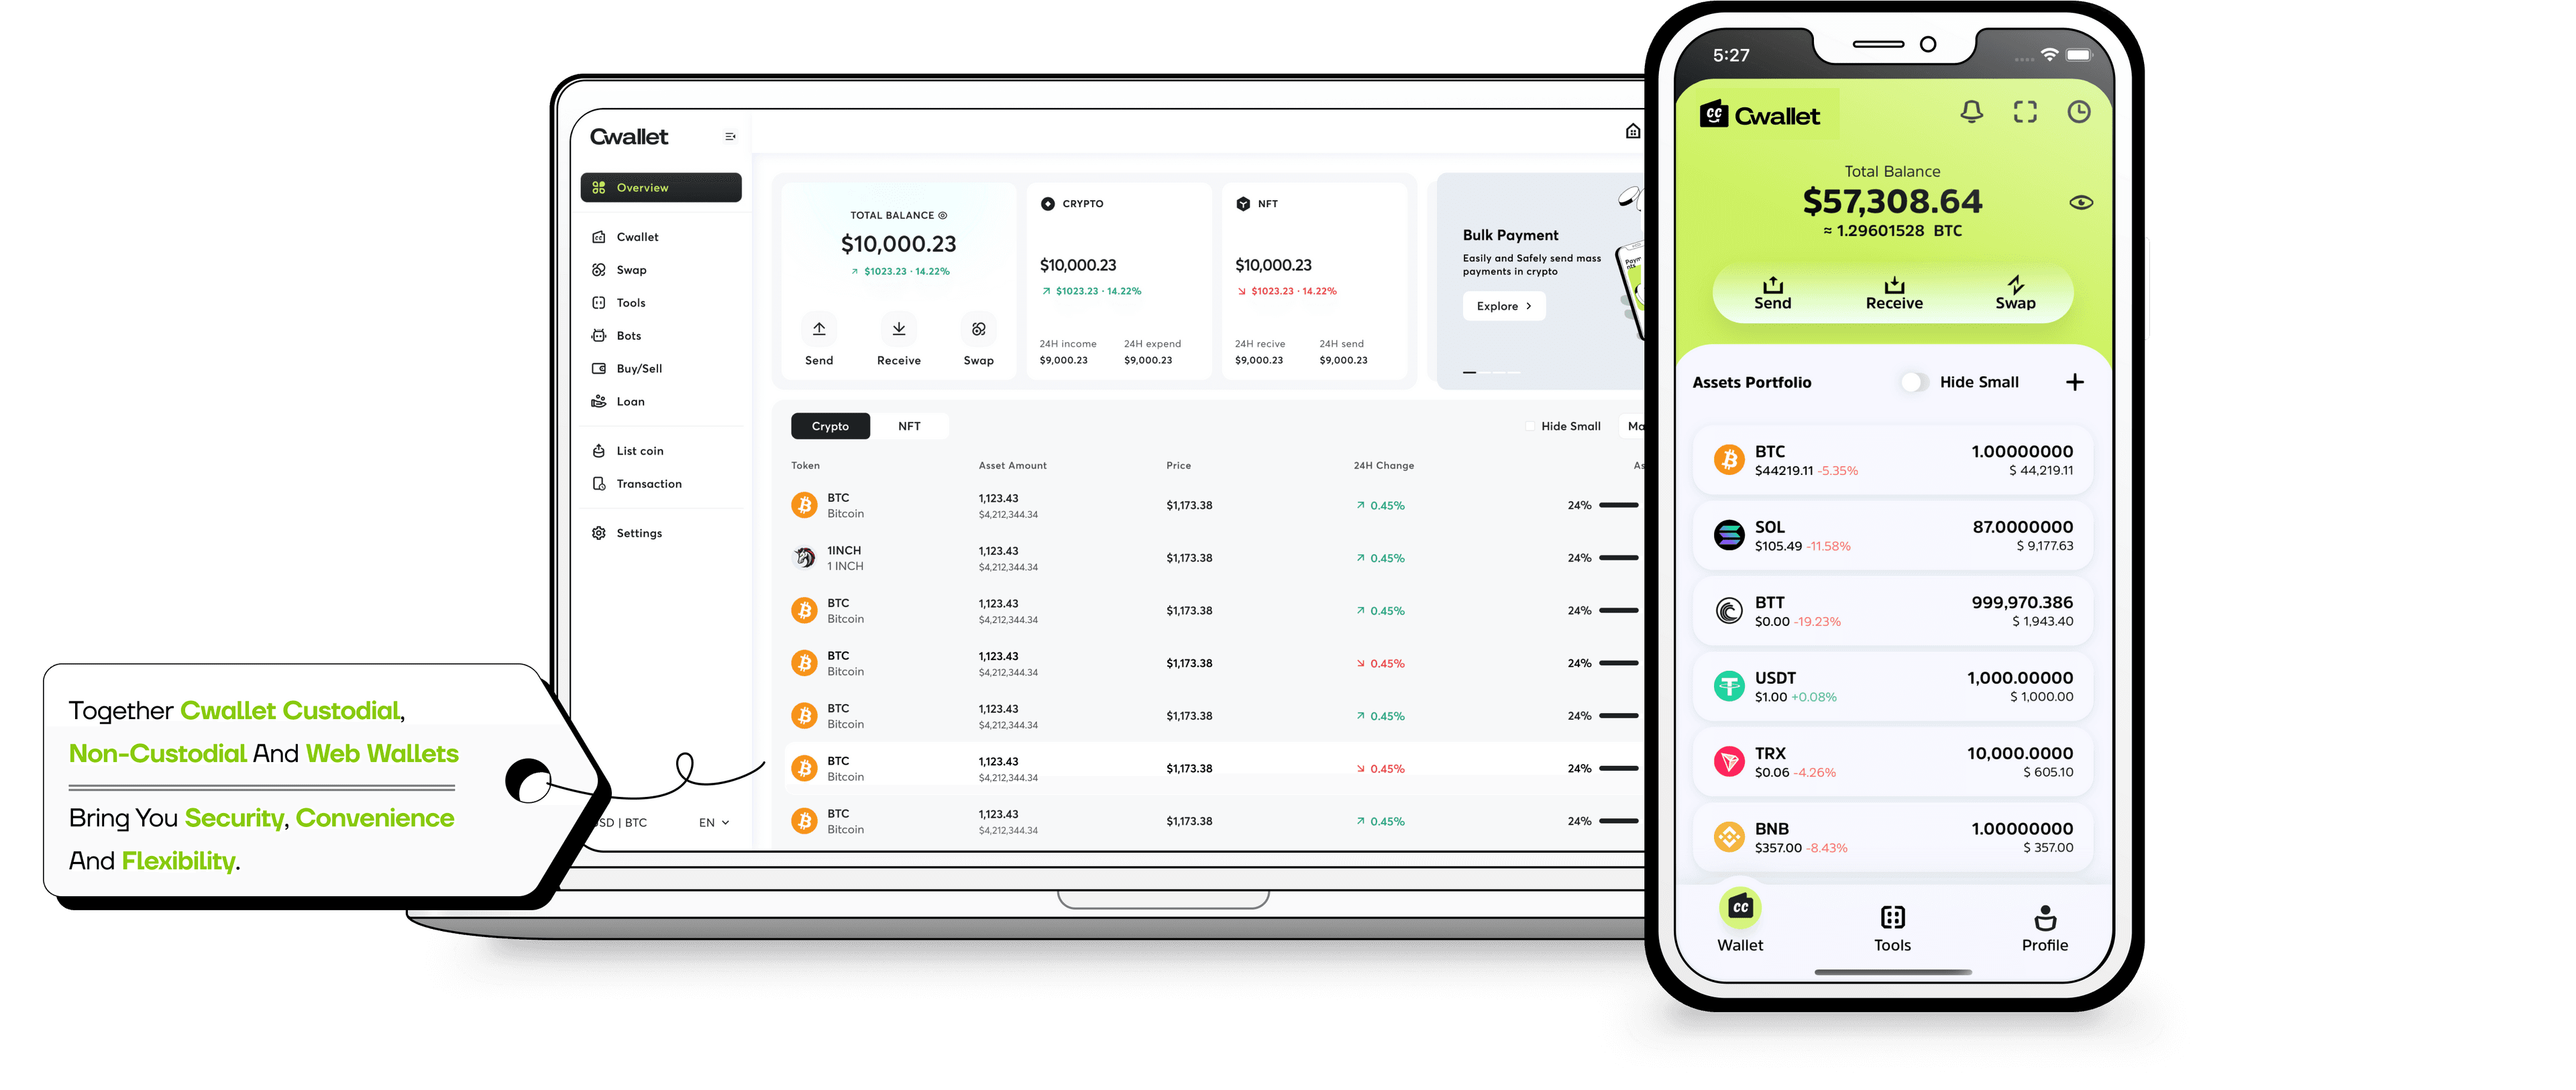 Easy access to a secure, convenient, and flexible crypto wallet